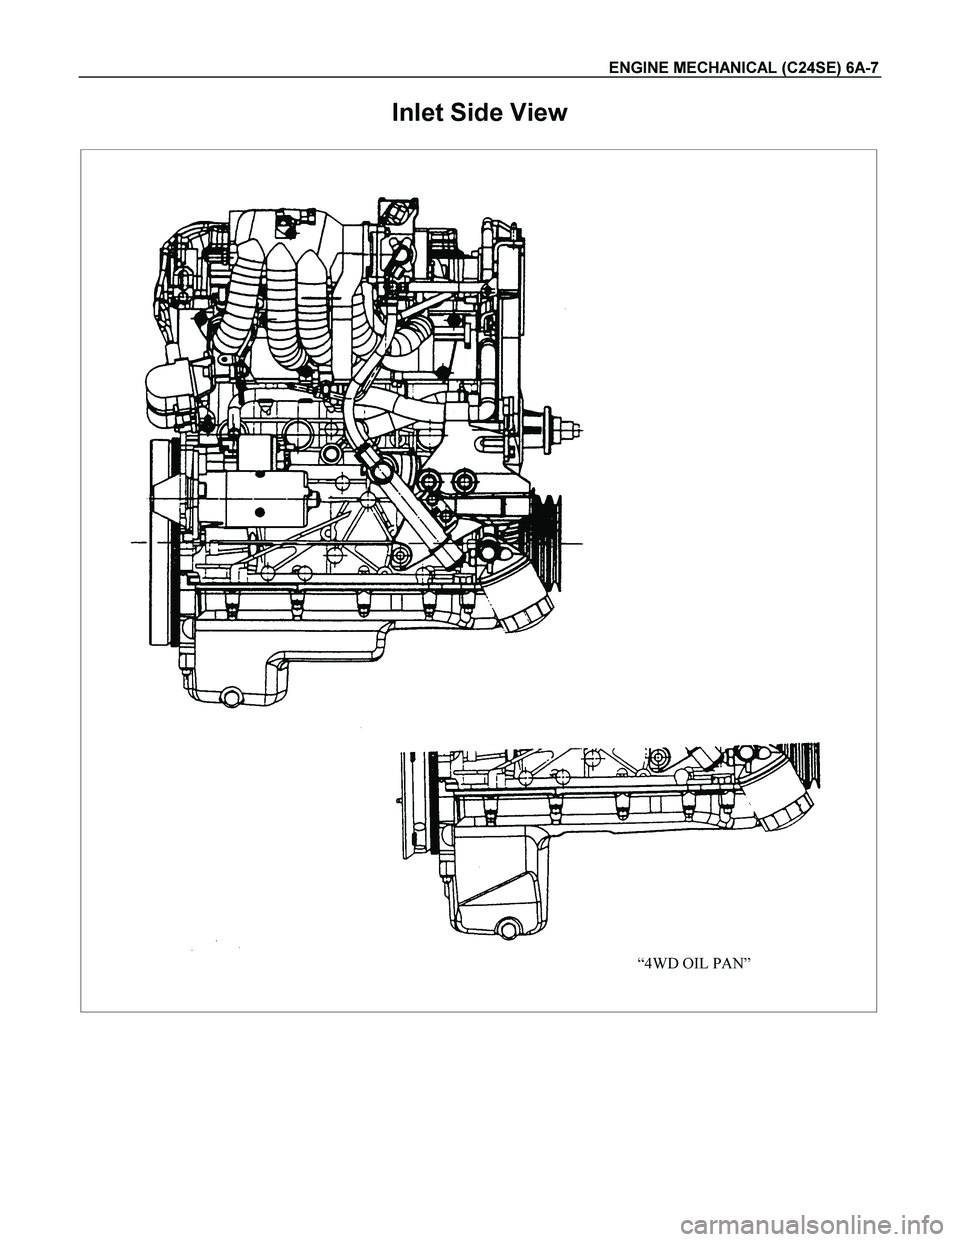 ISUZU TF SERIES 2004  Workshop Manual ENGINE MECHANICAL (C24SE) 6A-7 
Inlet Side View 
“4WD OIL PAN”
  